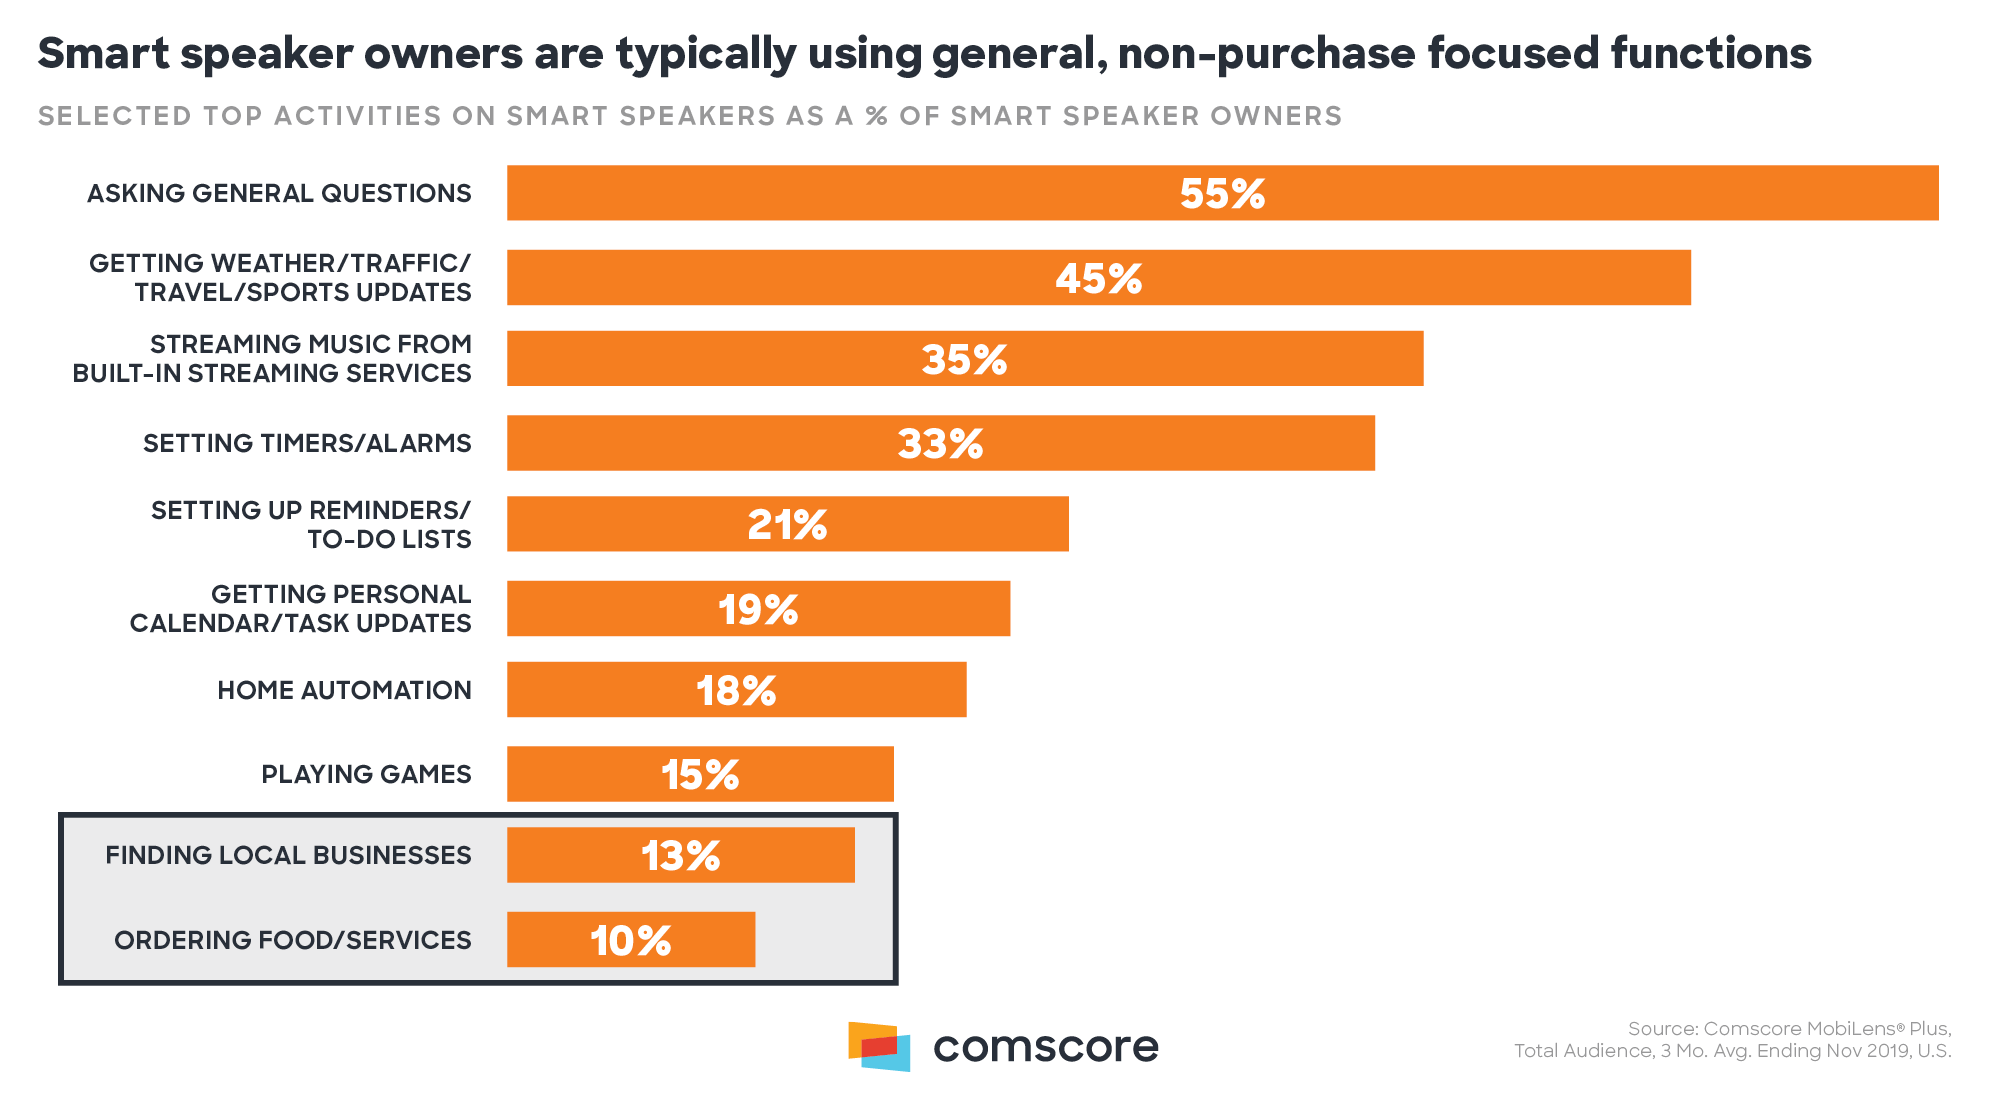 Smart Speaker Owners Are Typically Using General Non-Purchase Focused Functions